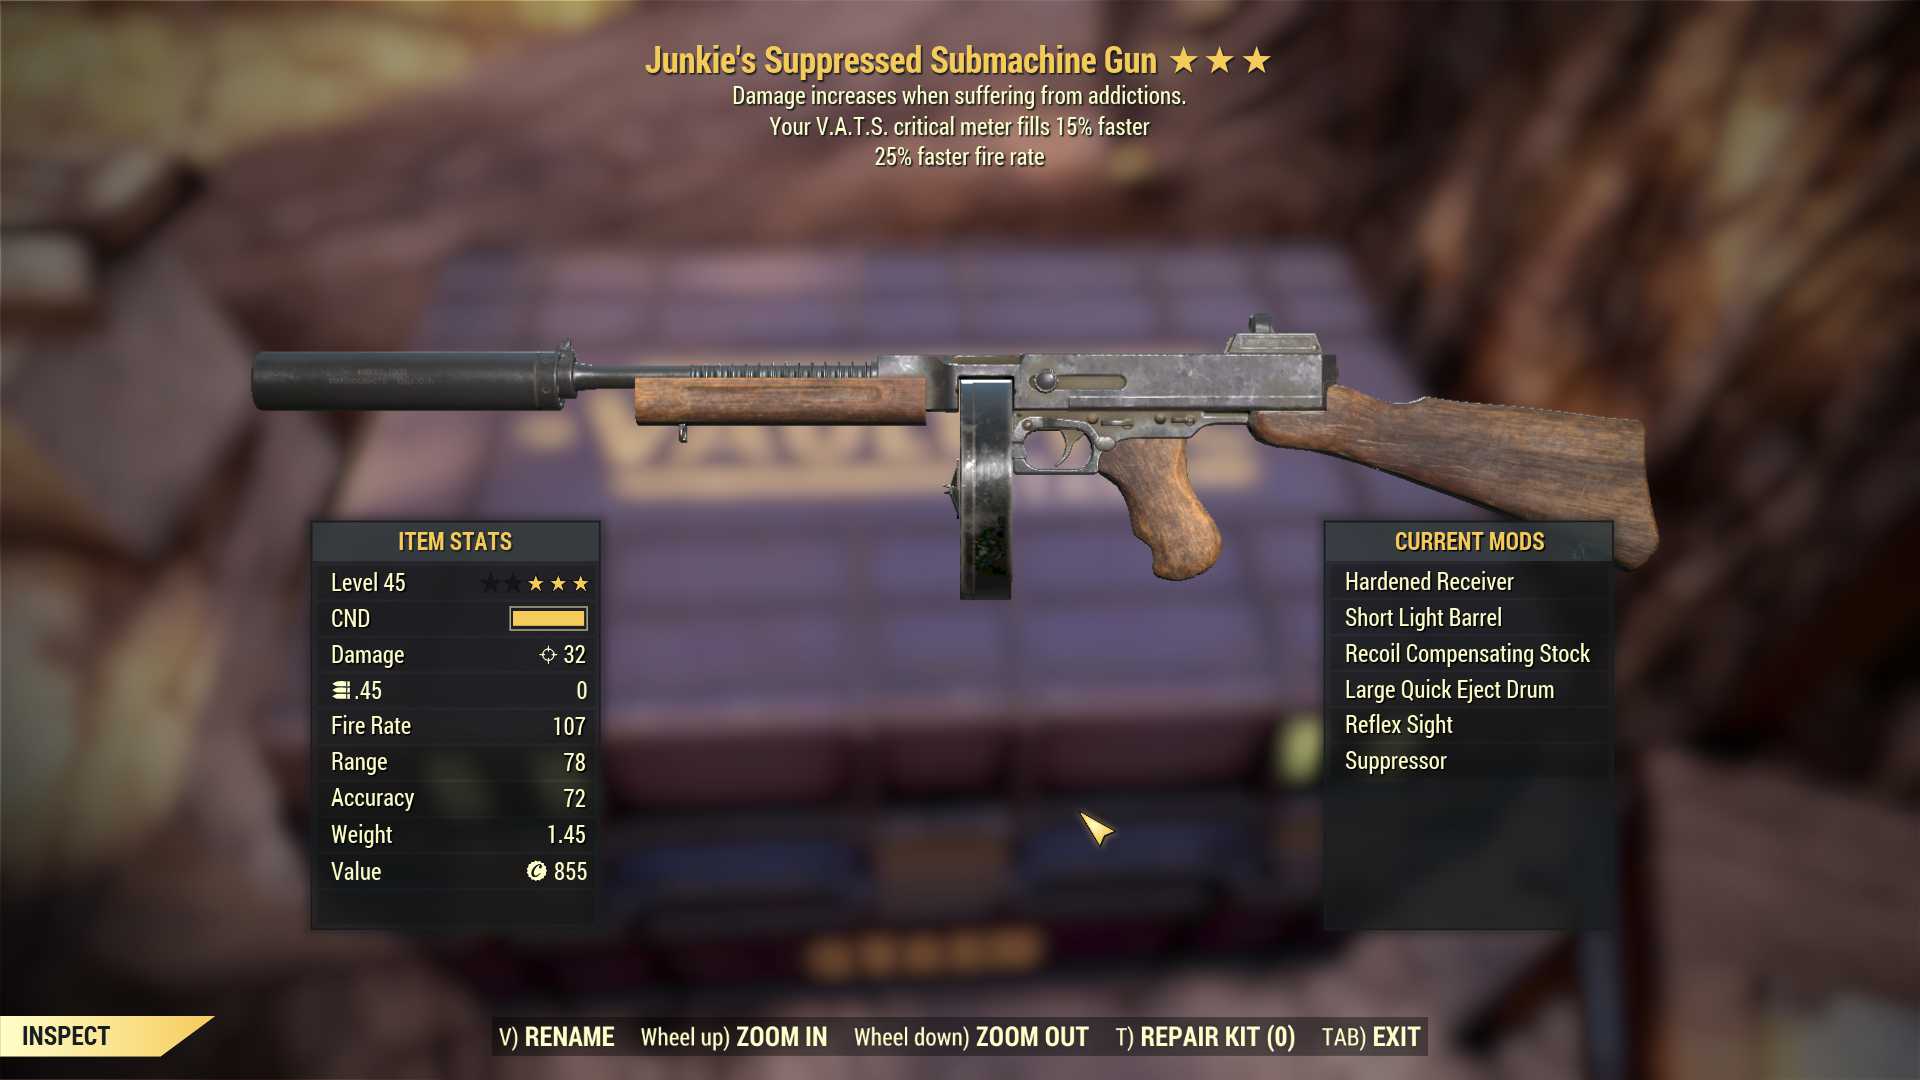 Junkie's Submachine Gun (25% faster fire rate, VATS crit fills 15% faster)